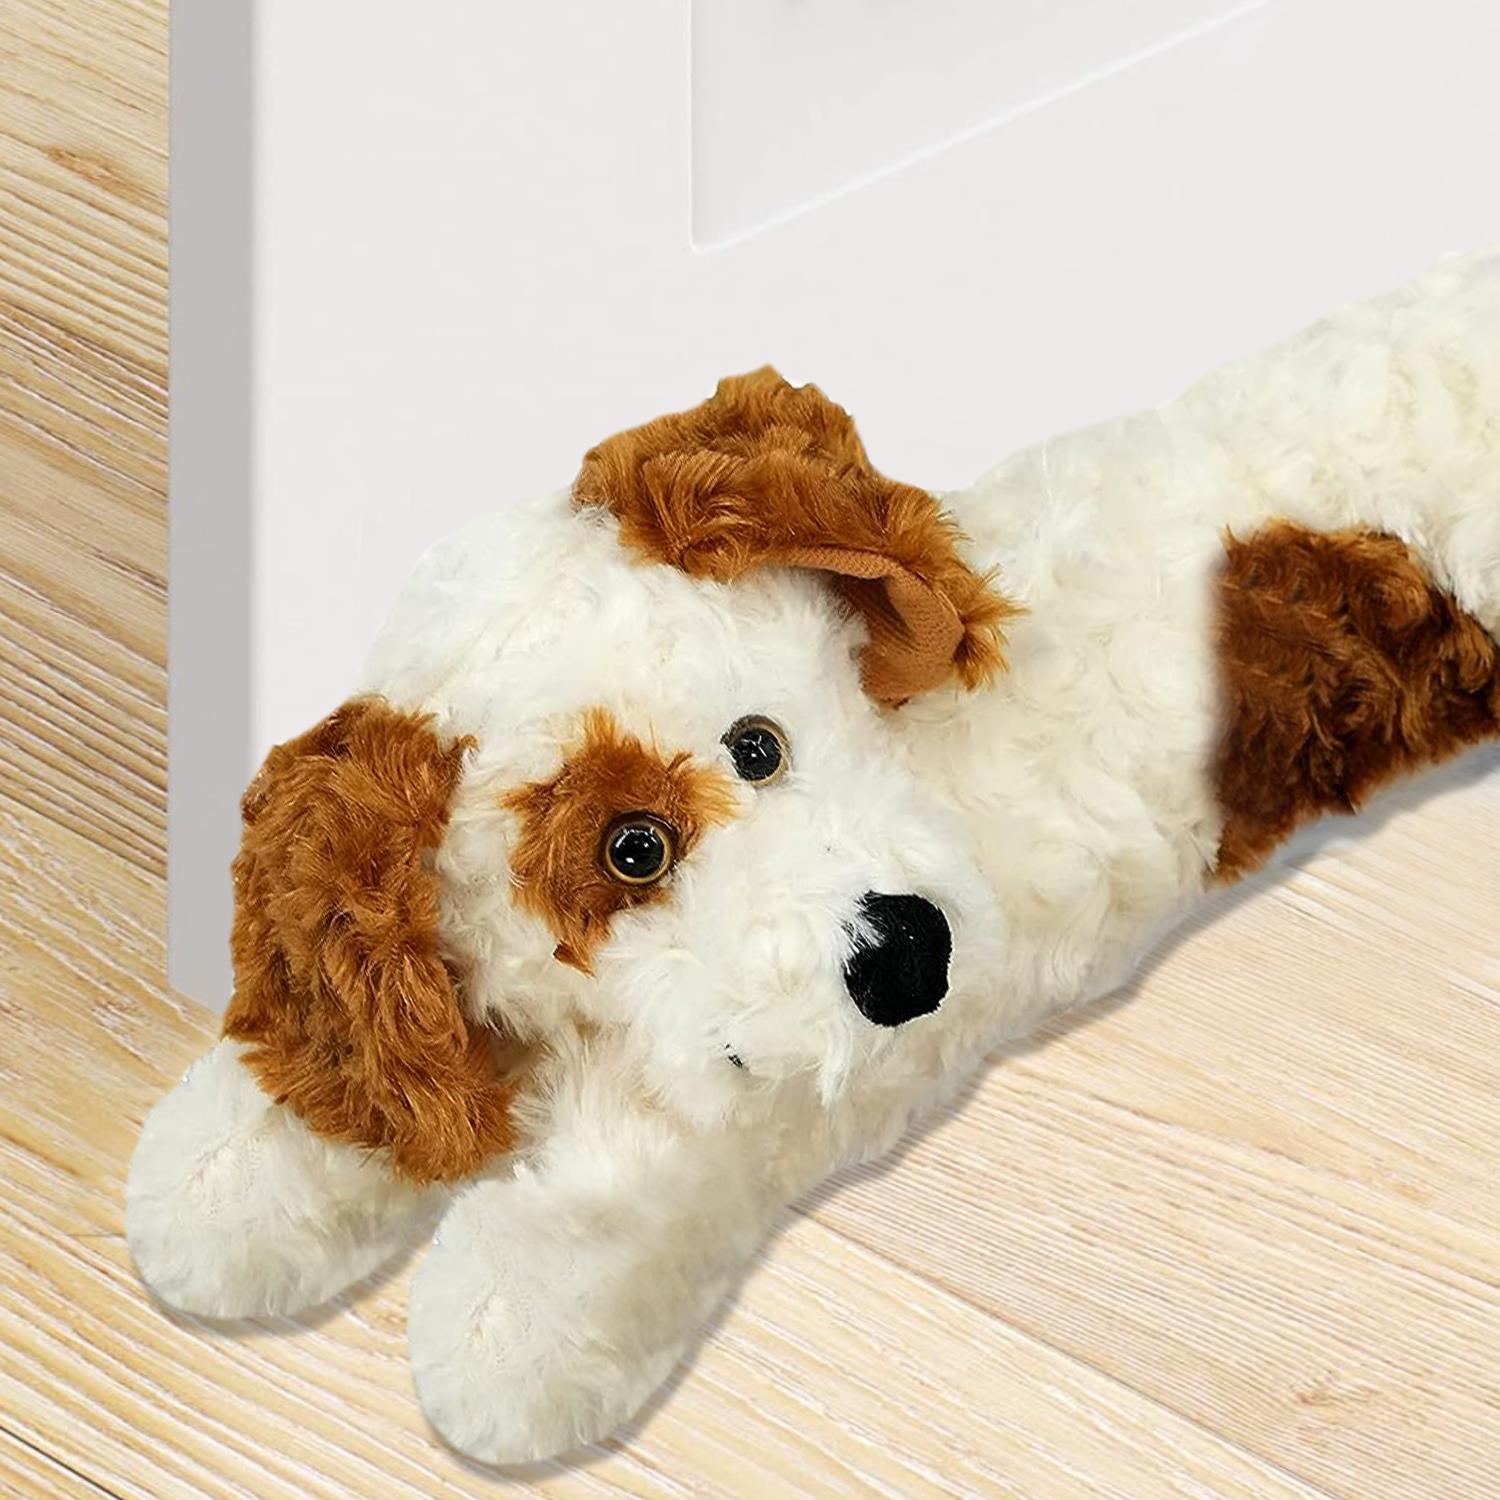 Novelty Cream Dog Excluder by Geezy - The Magic Toy Shop